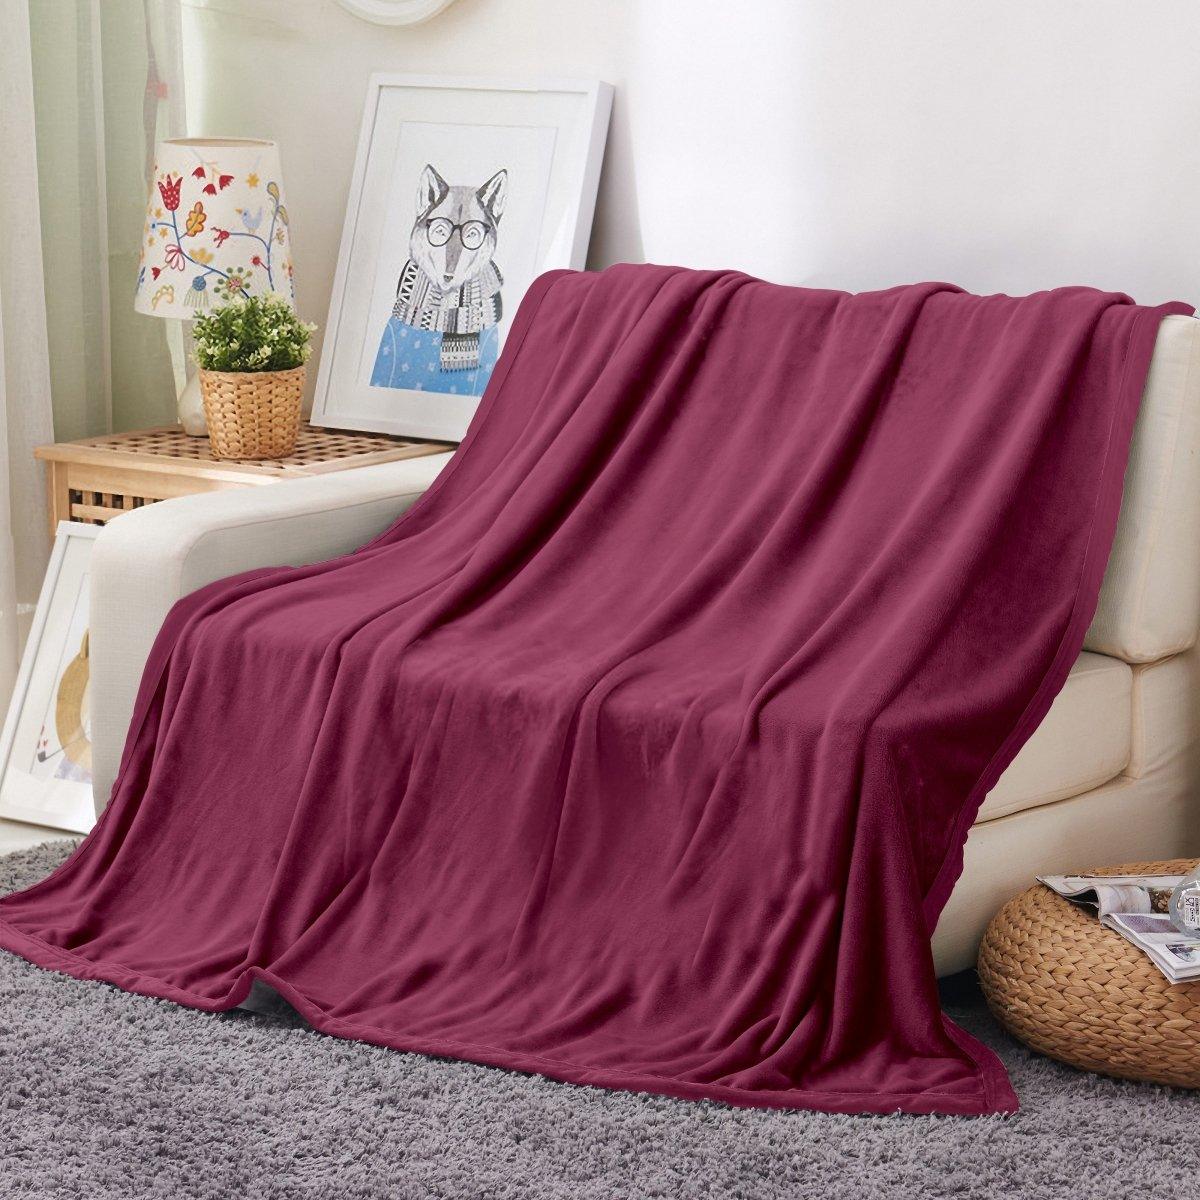 Ultra Soft Oversized Plush Solid Throw Blanket - Stylish Home Décor for Bed or Couch - Spirit Linen